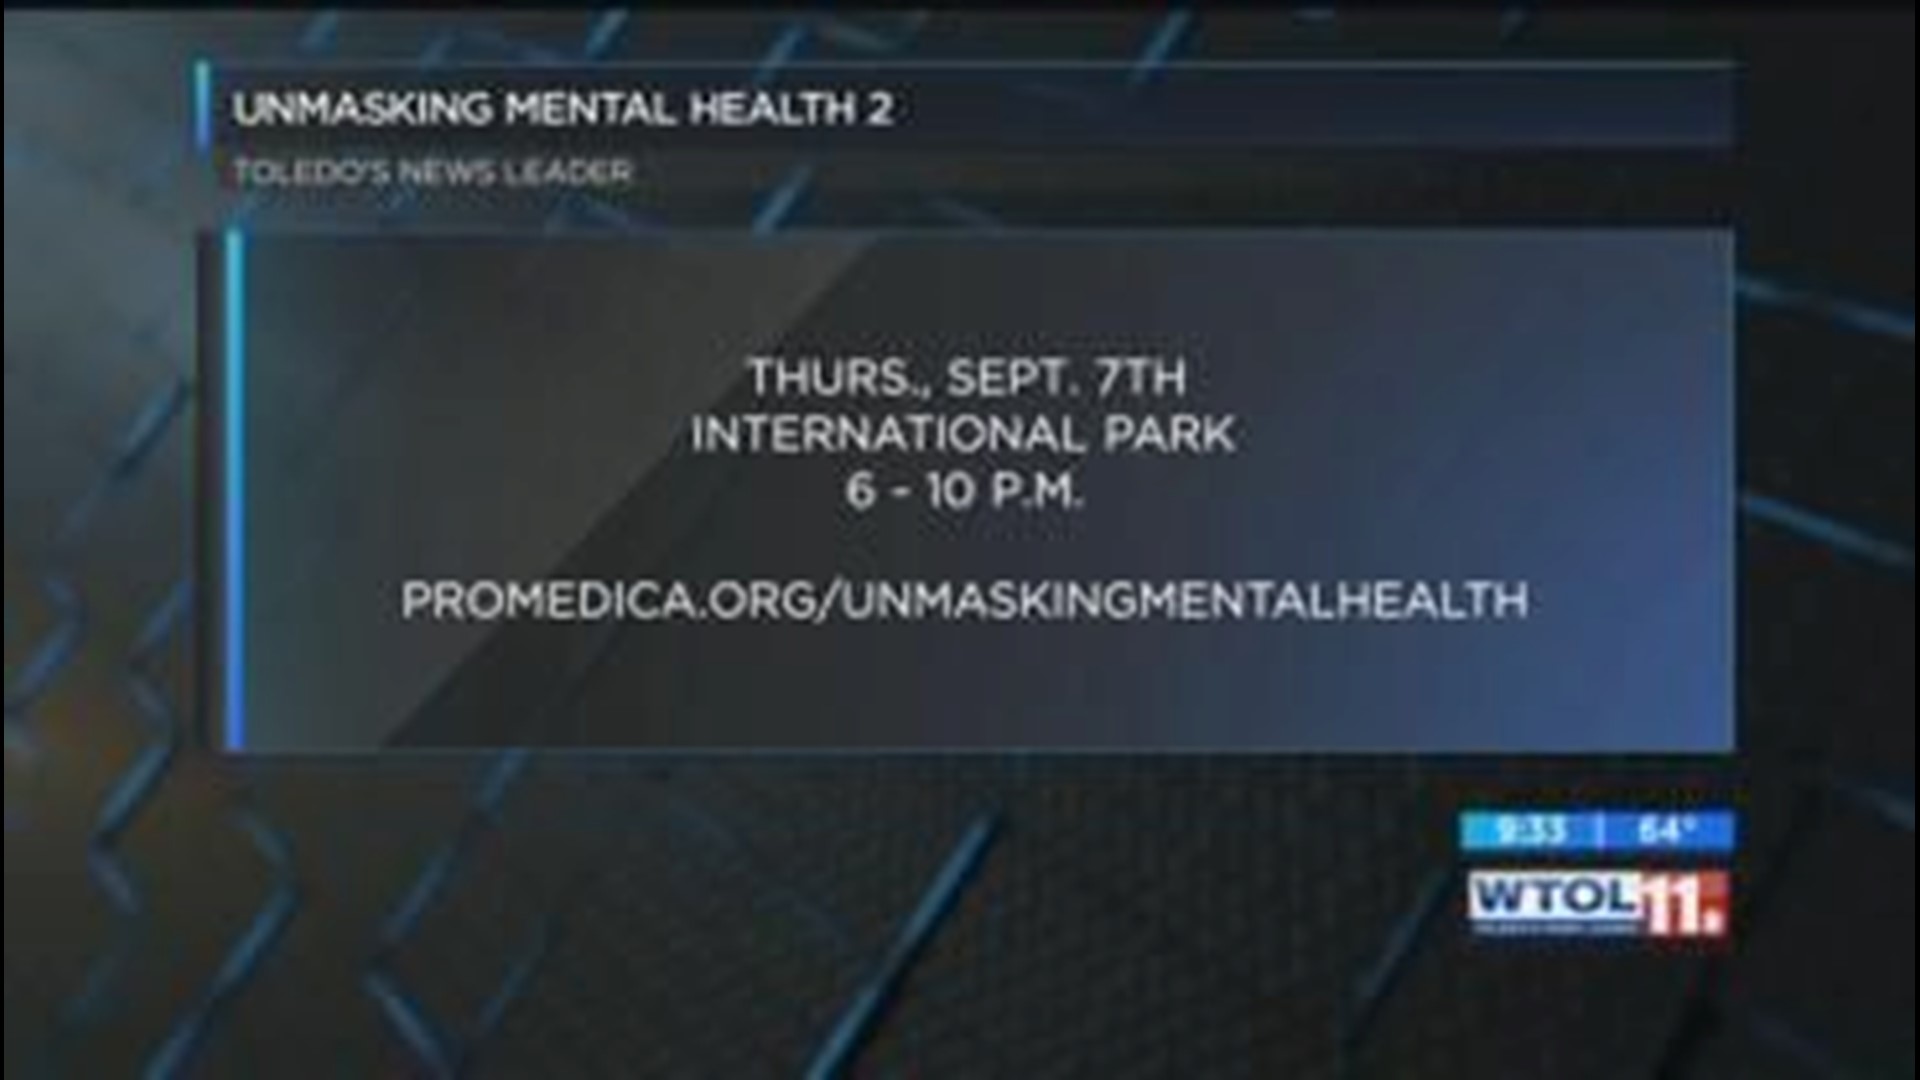 Unmask mental health with ProMedica